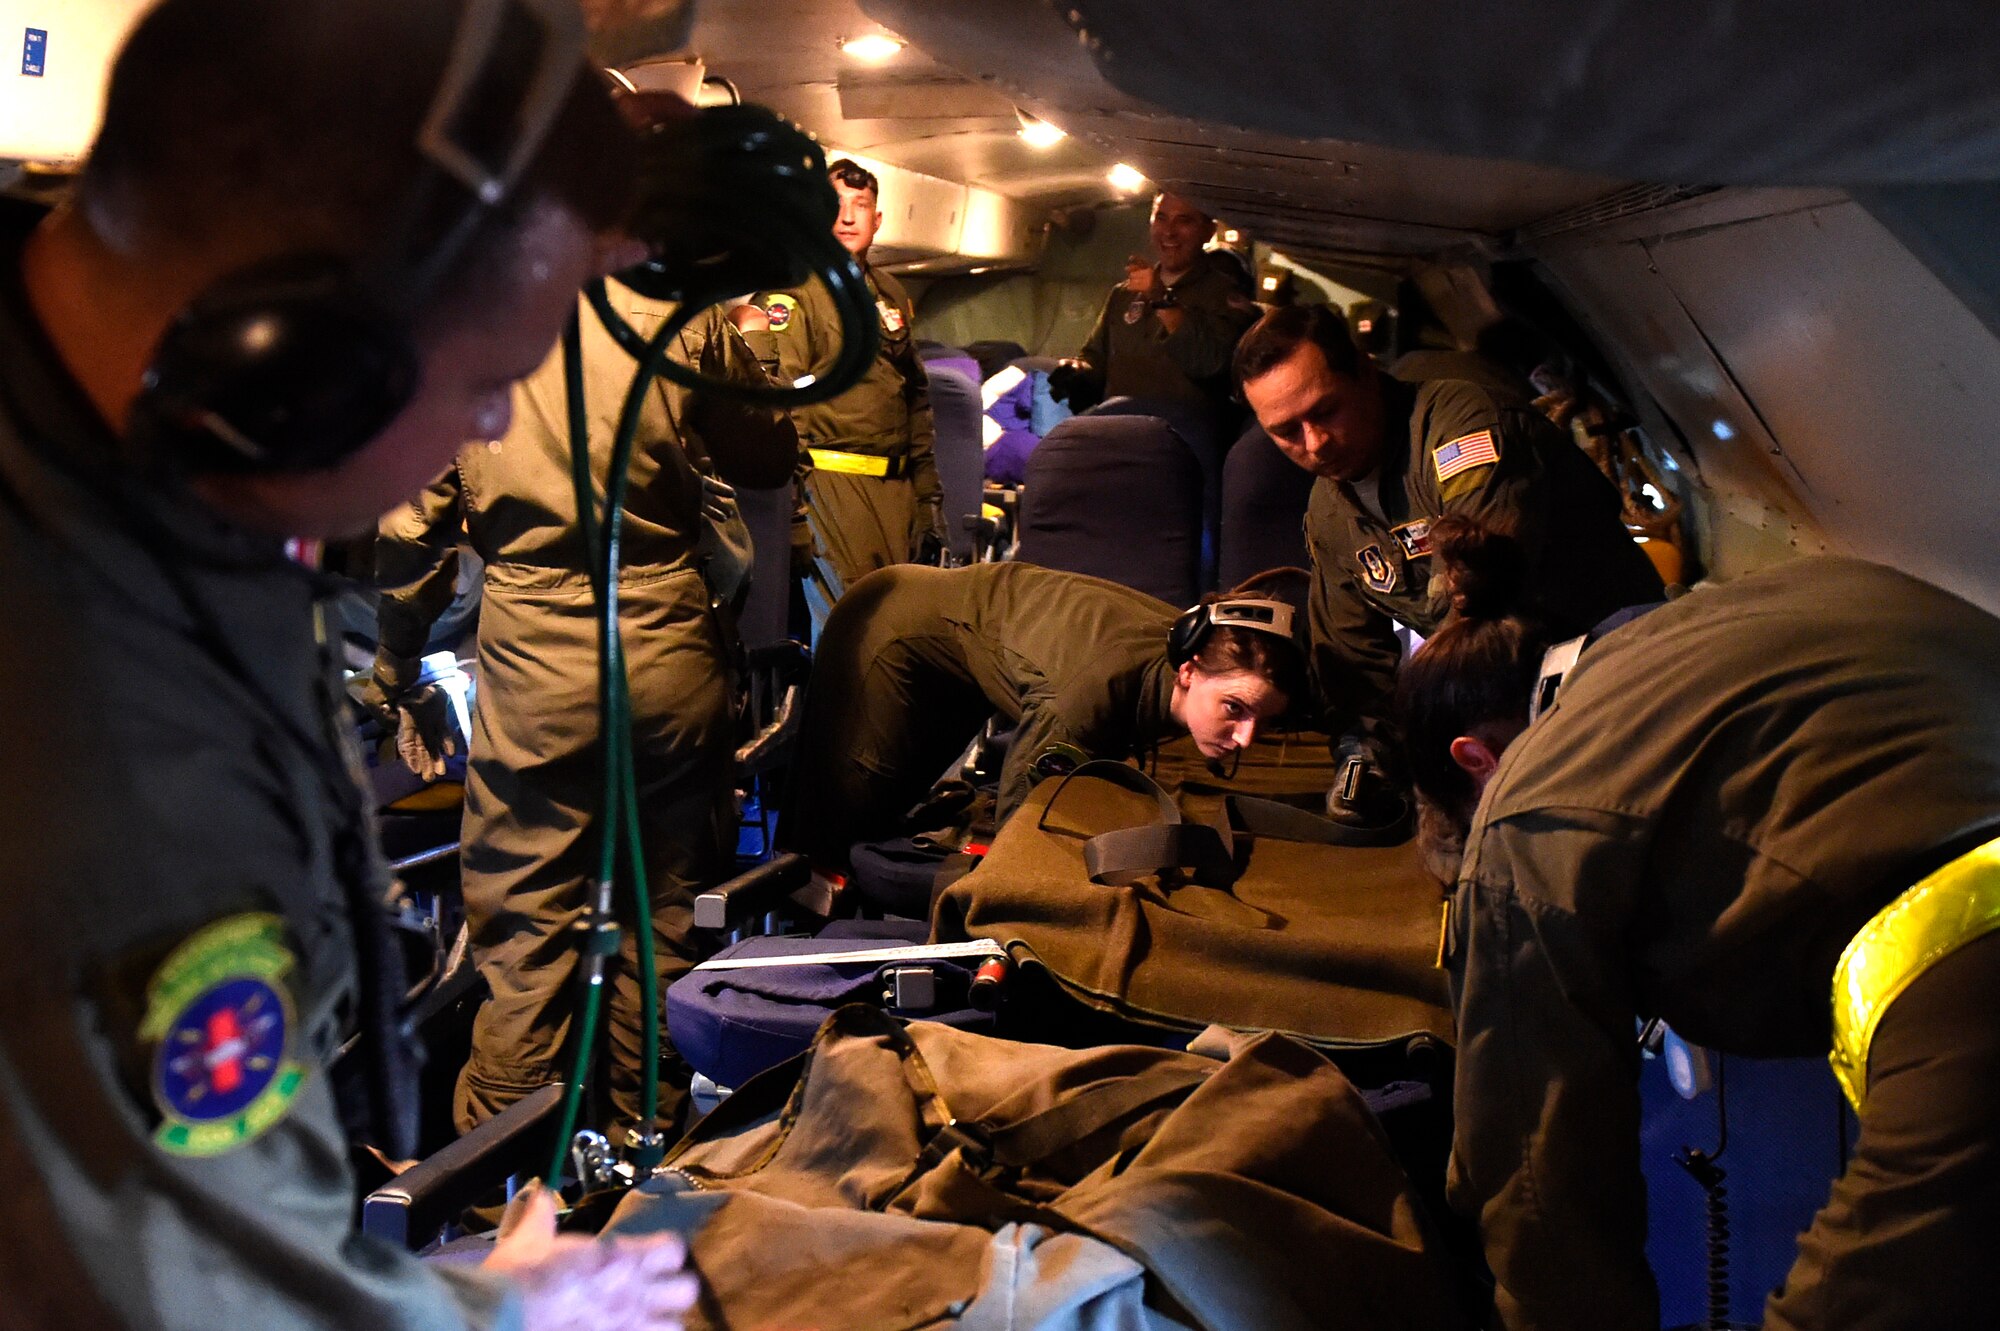 Members from the 433rd Aeromedical Evacuation Squadron prepare medical equipment to aide patients during a training scenario on-board a C-5 Galaxy aircraft Oct. 7, 2015 at Joint Base San Antonio-Lackland, Texas. Configuring a C-5 to meet their needs, the 433rd AES members established and met requirements to conduct Aeromedical Readiness Missions while maintaining the focus on the patient, significantly improving the efficiency and effectiveness of safe and responsive patients globally. (U.S. Air Force photo by Senior Airman Keith James/Released)